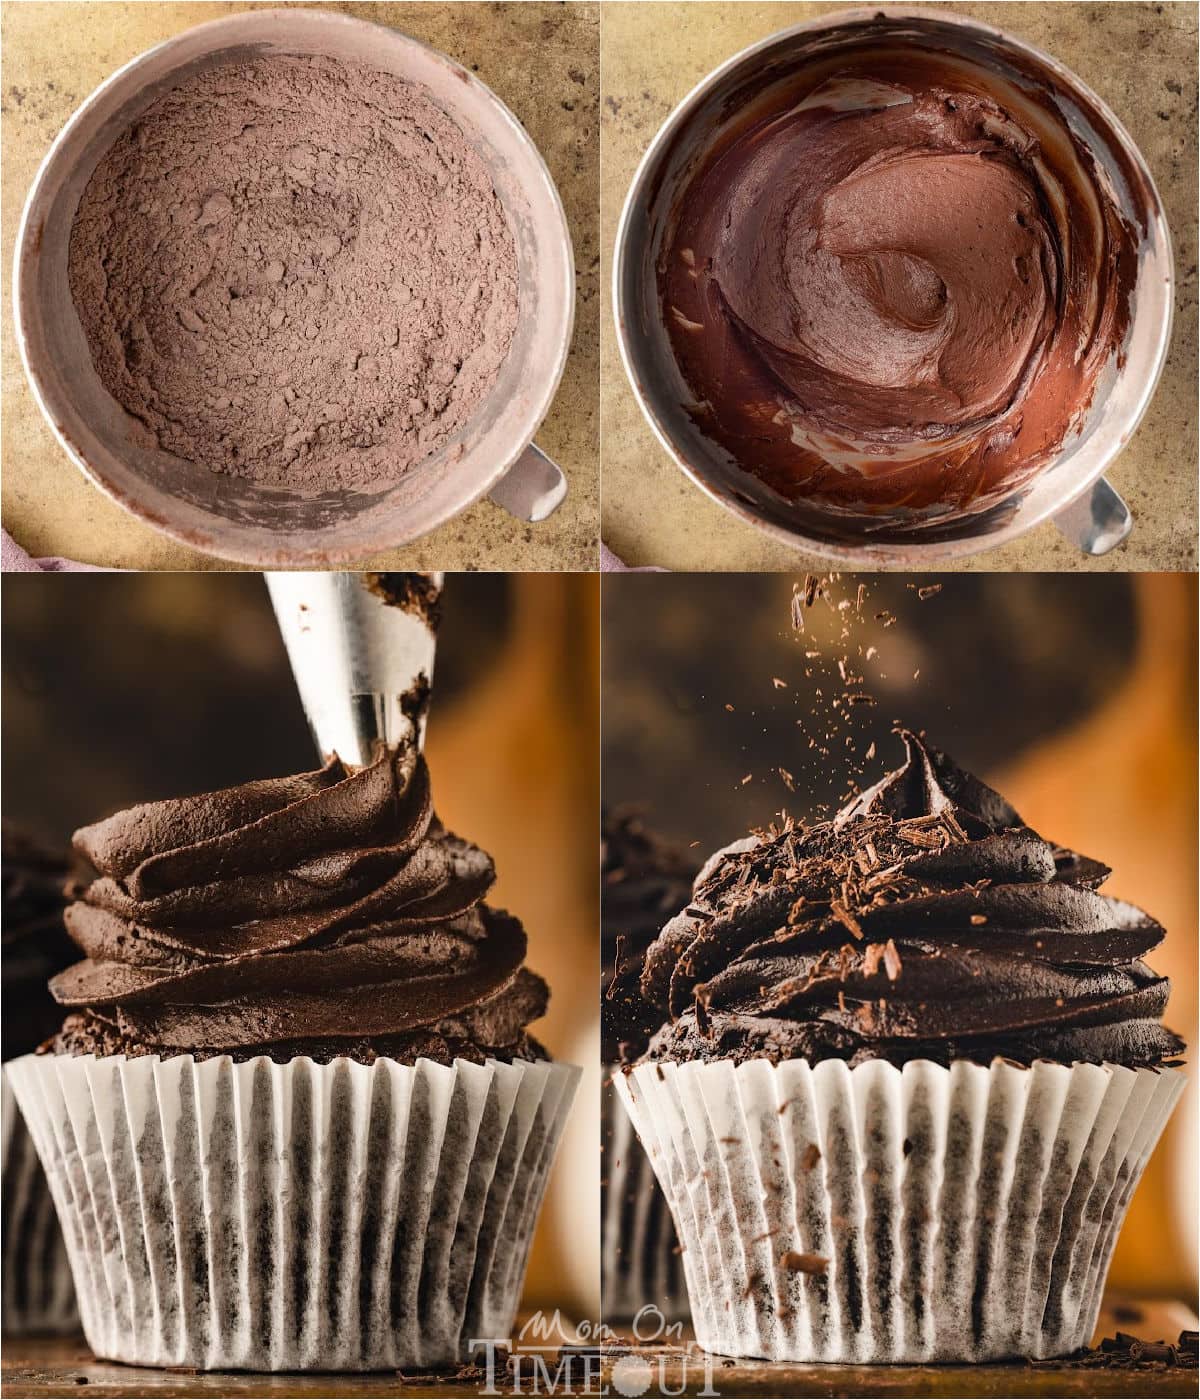 four image collage showing how to make chocolate buttercream and how to frost the cupcakes.